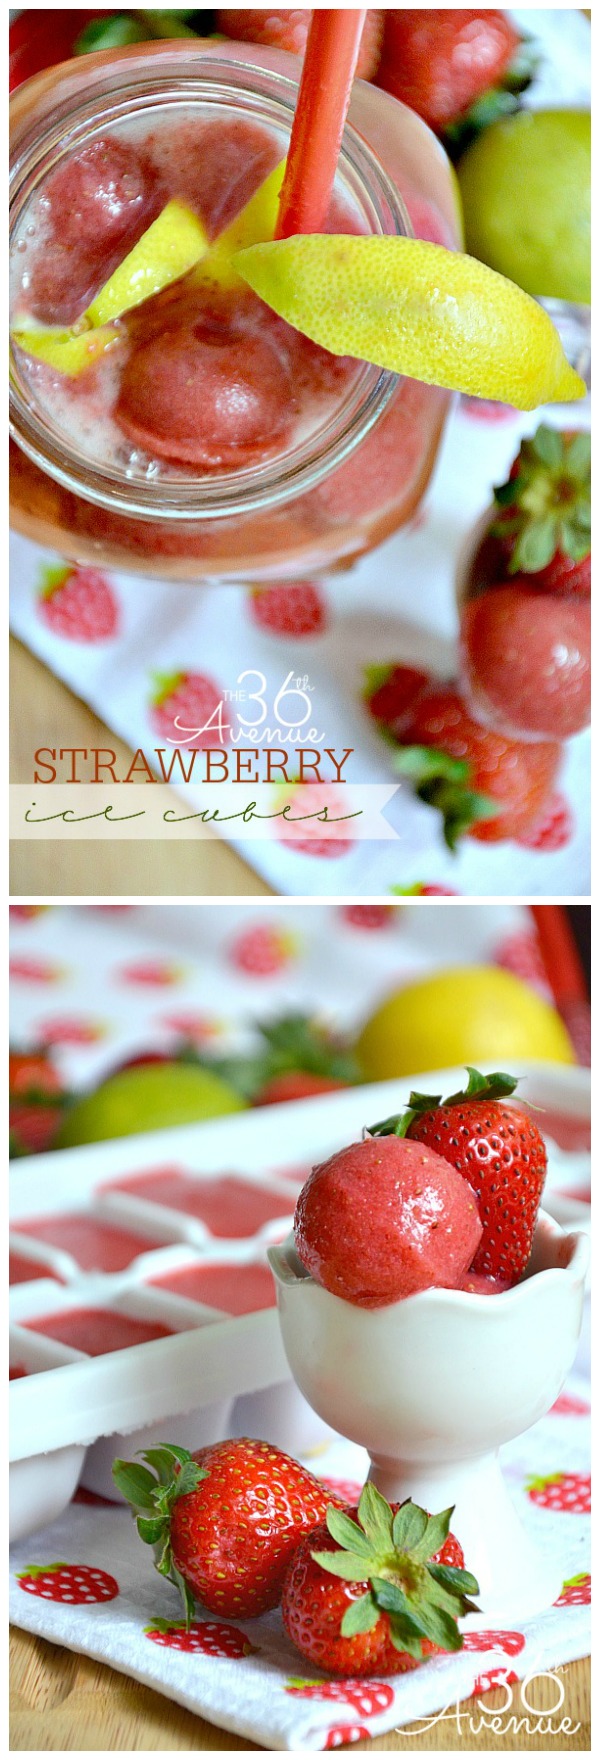 Strawberry Ice Cubes Recipe by the36thavenue.com Such an easy and delicious way to add flavor to your drinks!